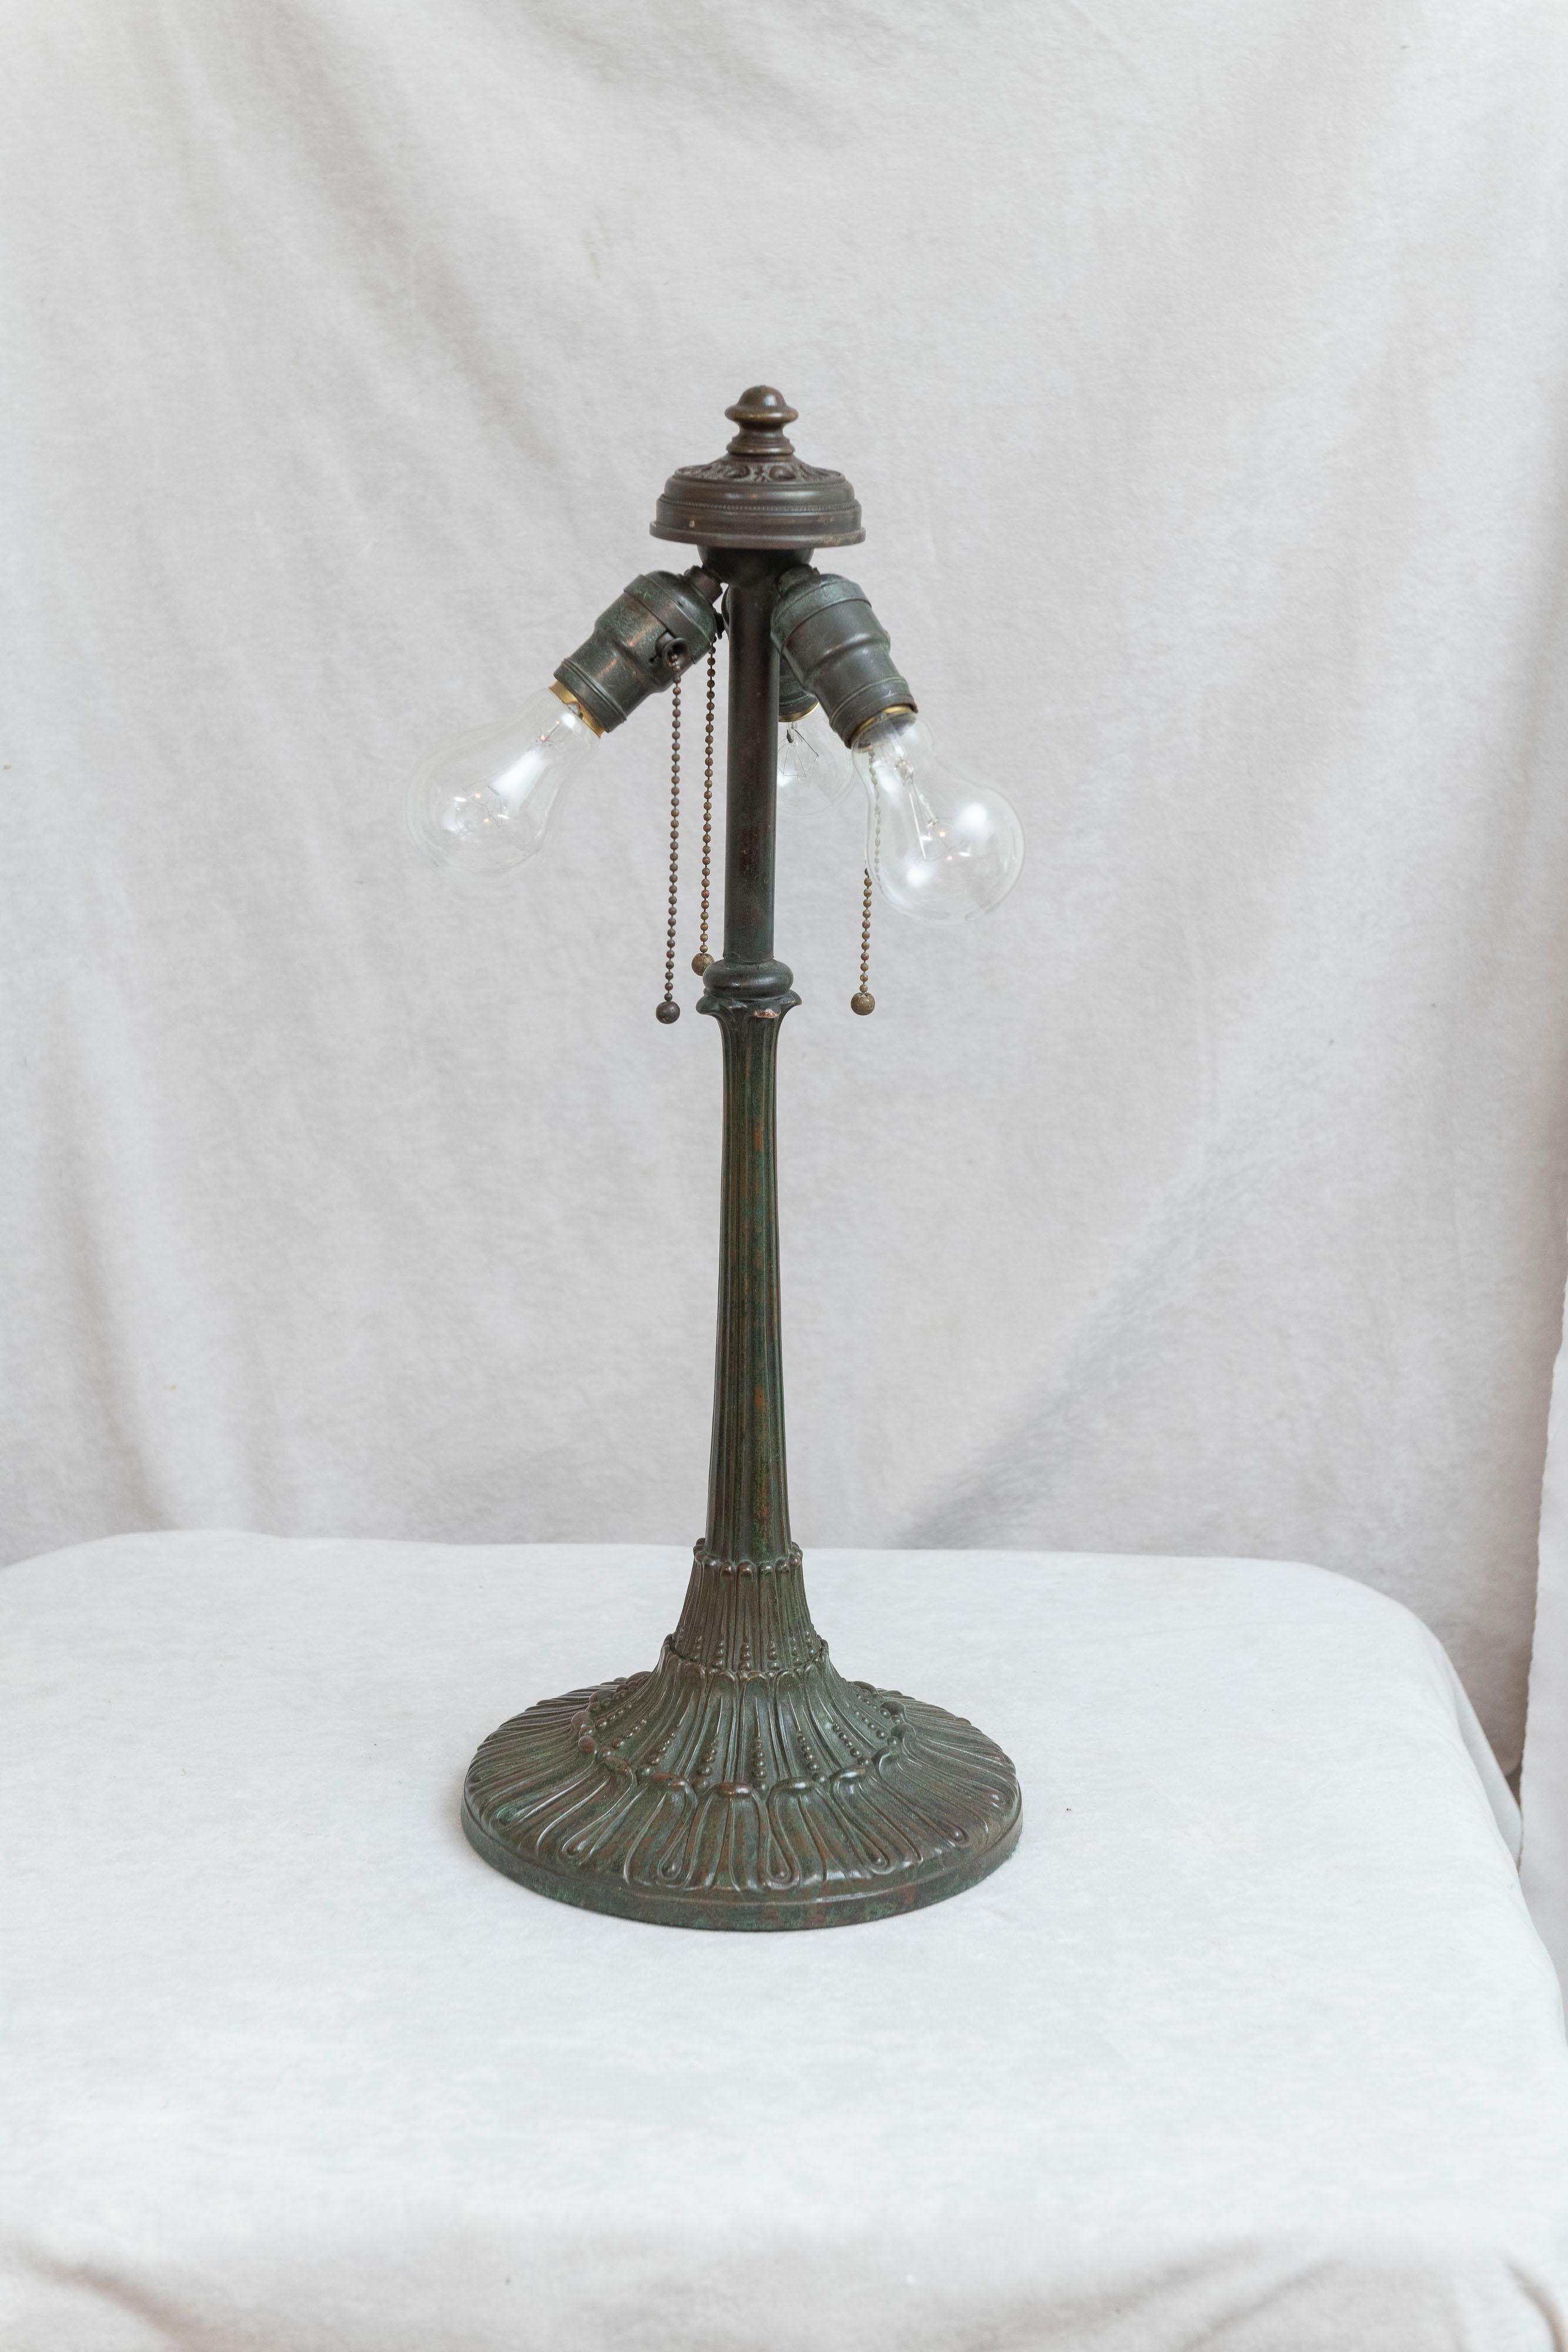 Art Nouveau American Leaded Glass Table Lamp by Wilkinson, circa 1910